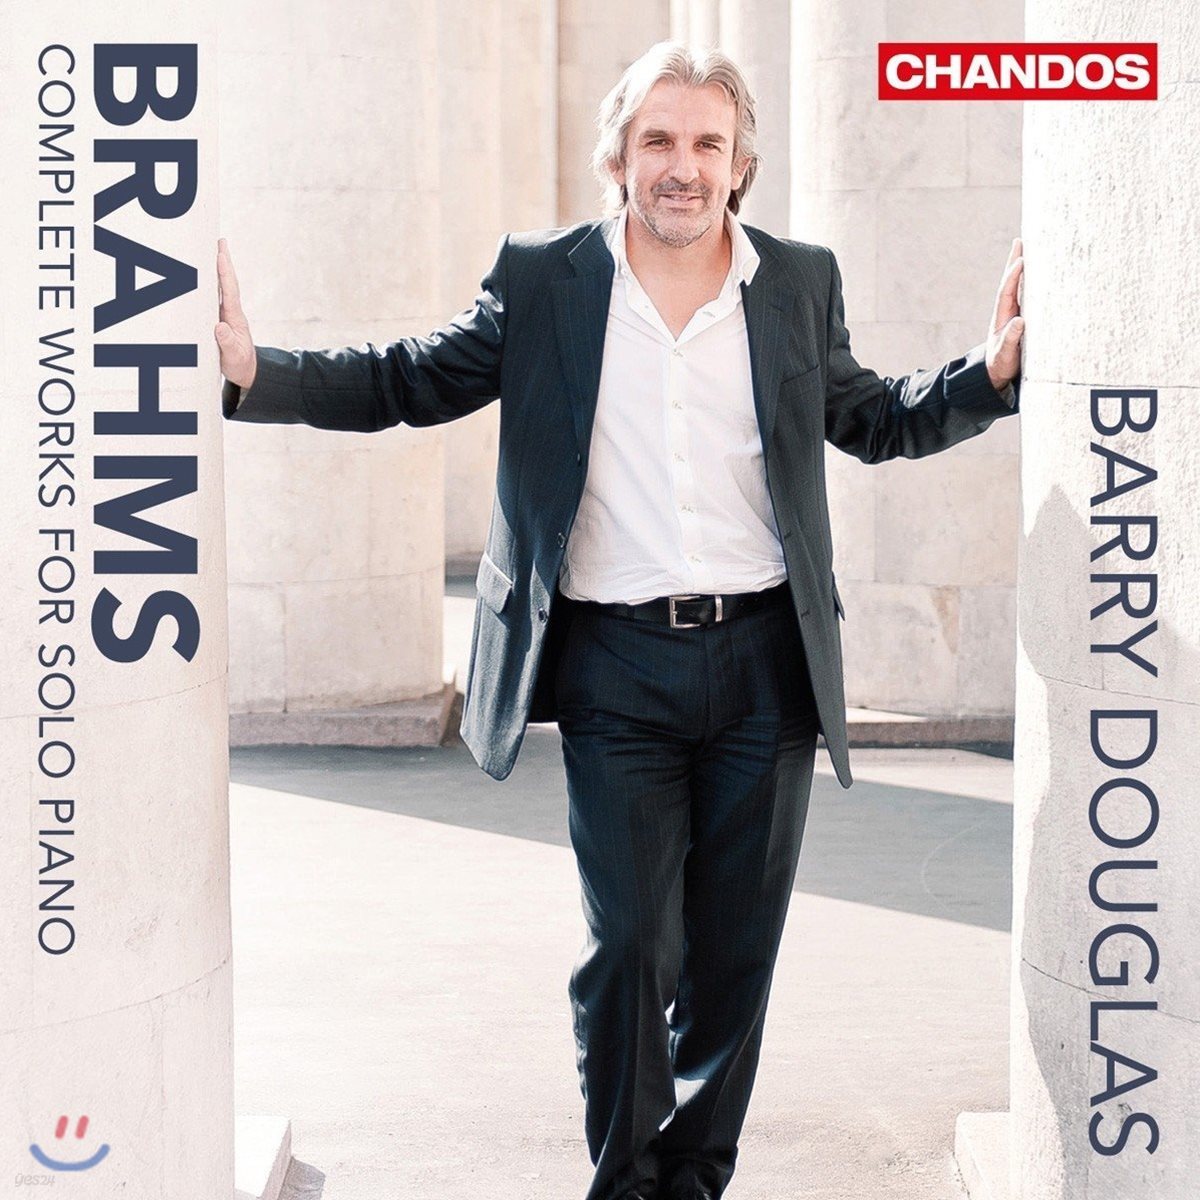 Barry Douglas 브람스: 피아노 솔로 작품 전집 - 배리 더글라스 (Brahms: Complete Works For Solo Piano)